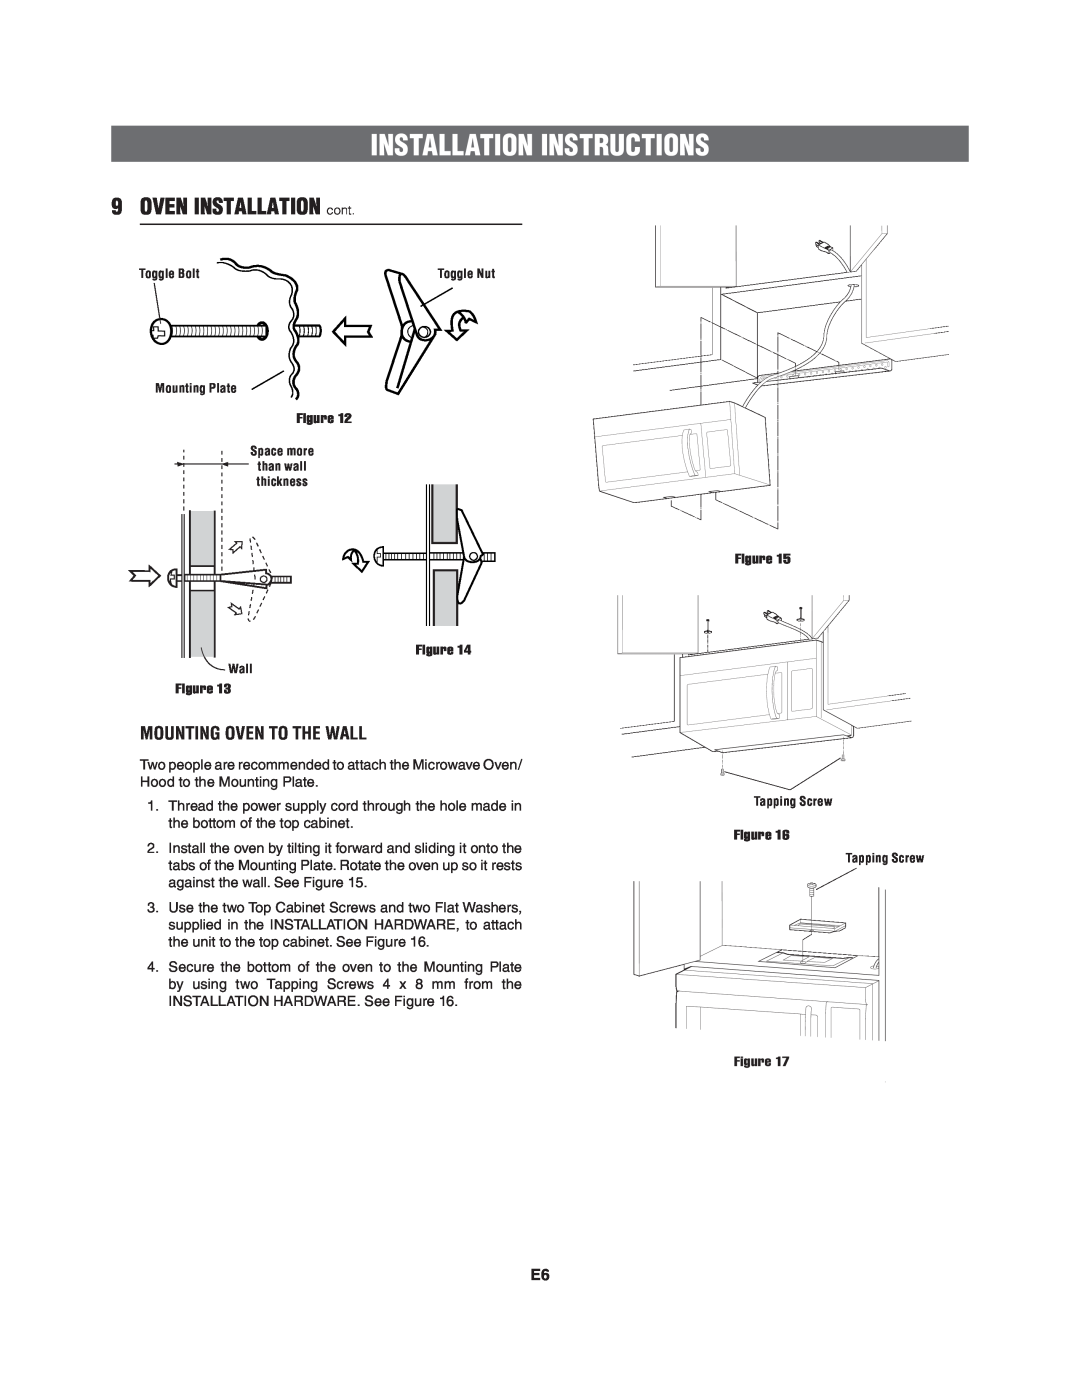 Frigidaire 316495062 installation instructions OVEN INSTALLATION cont, Mounting Oven To The Wall, Installation Instructions 